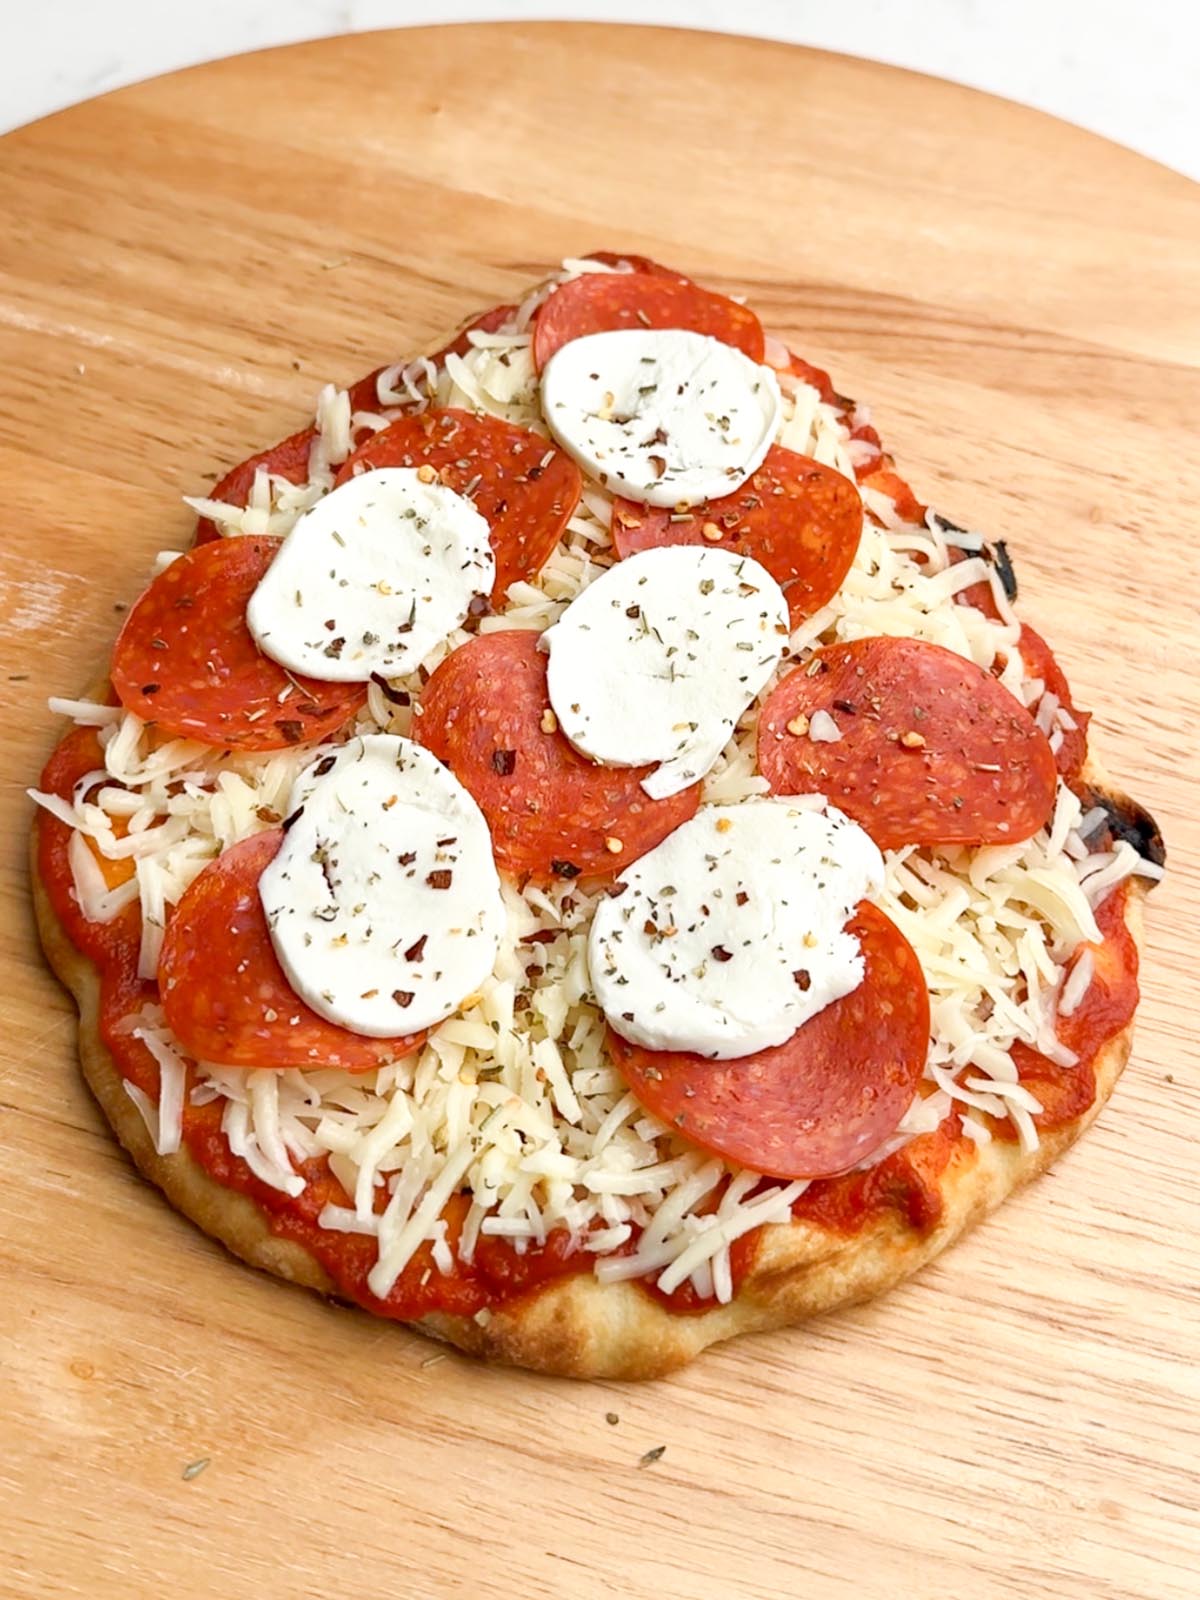 unbaked pepperoni flatbread on a wooden cutting board